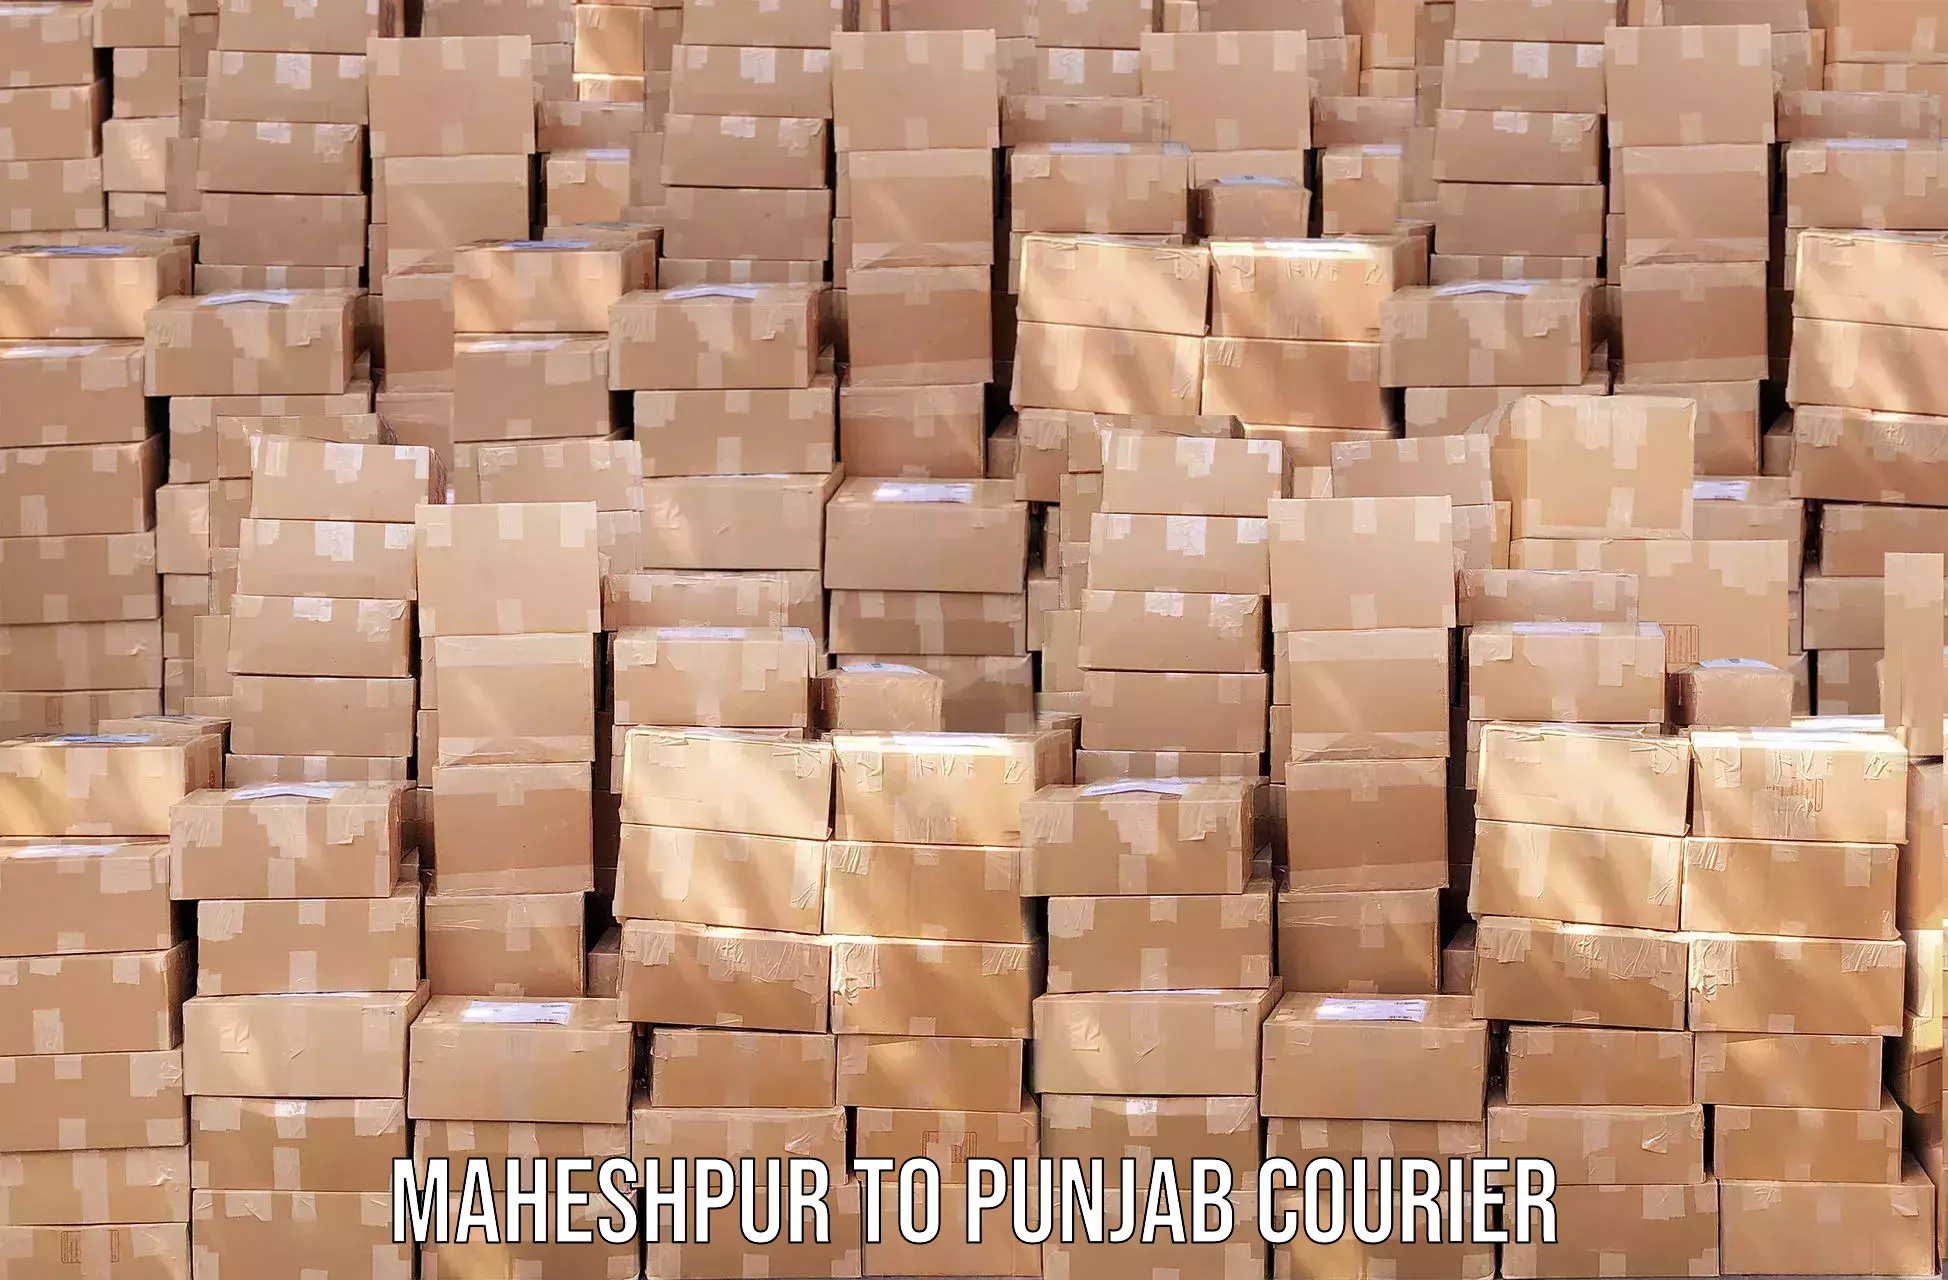 Same-day delivery solutions Maheshpur to Ajnala